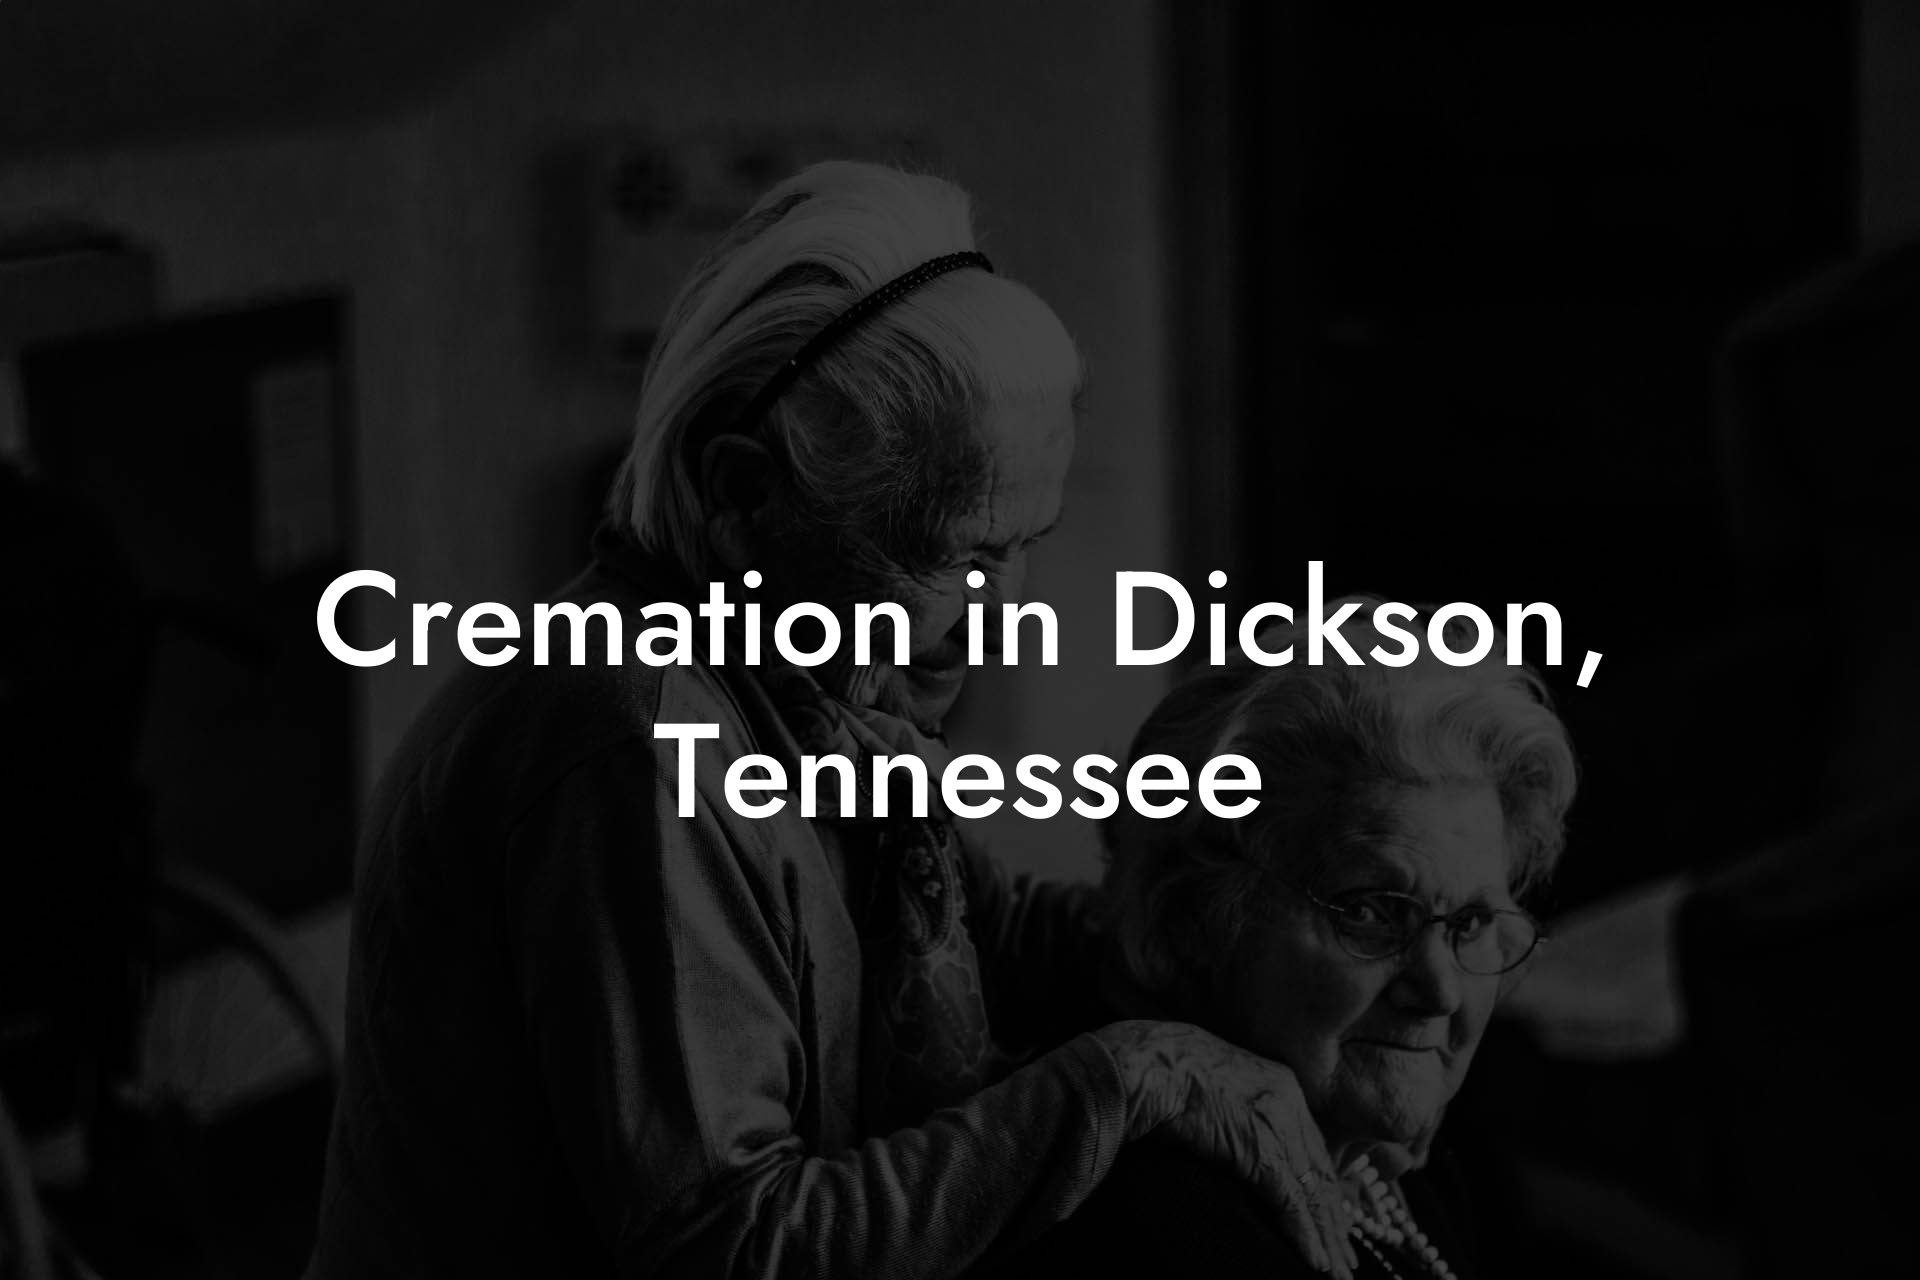 Cremation in Dickson, Tennessee